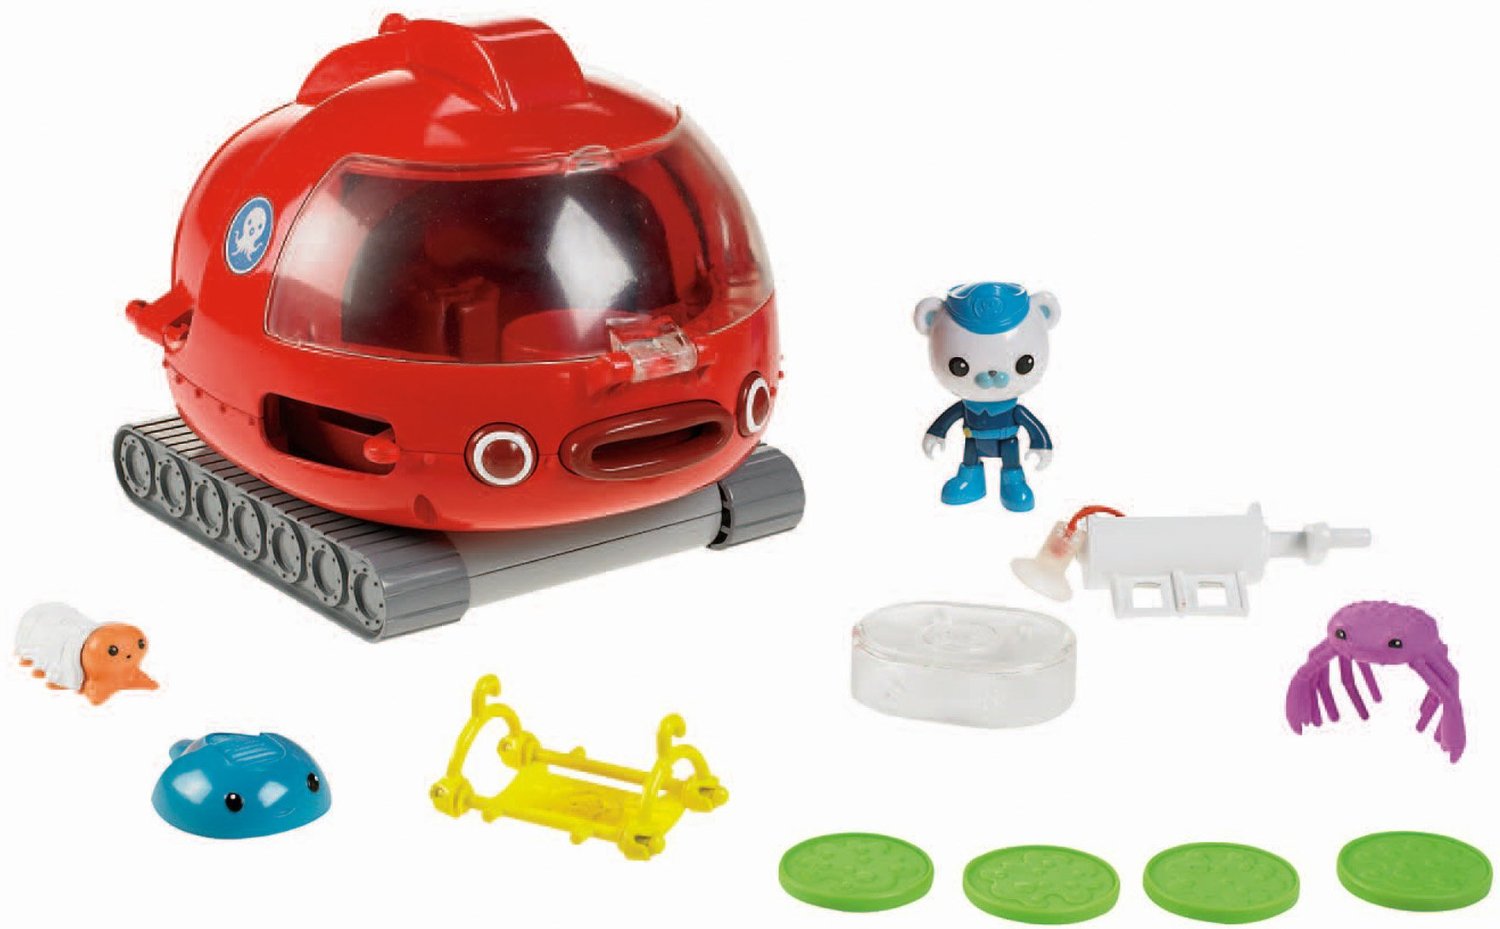 Fisher-Price Octonauts Launch and Rescue Gup X Vehicle Only $10.90 (Reg. $36.99)